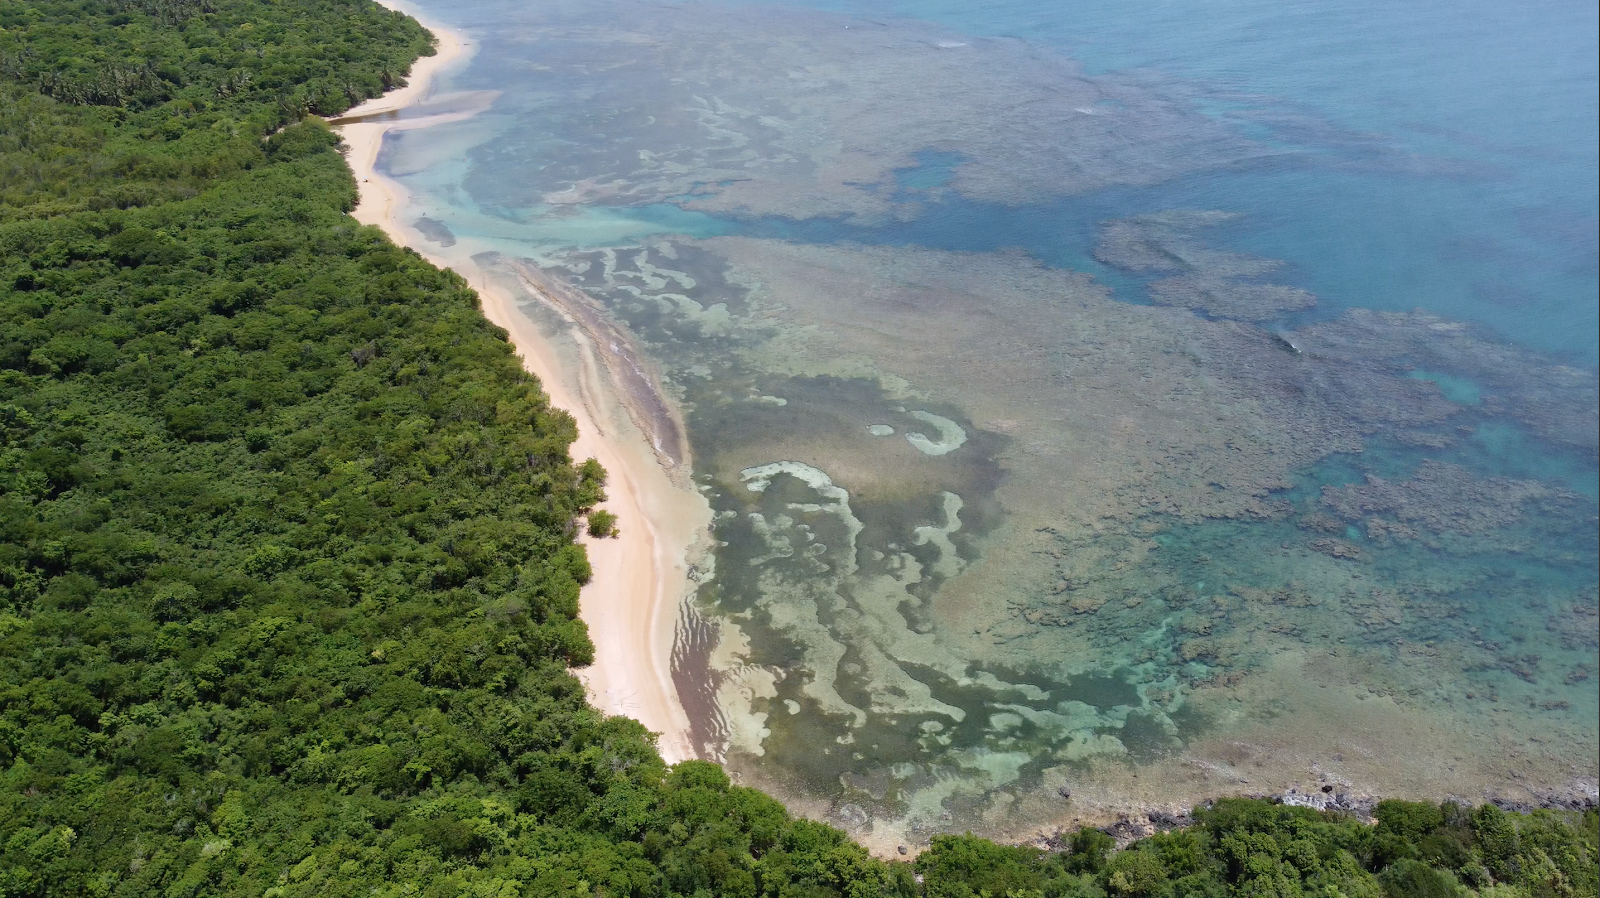 Photo of Playa Escondida located in natural area